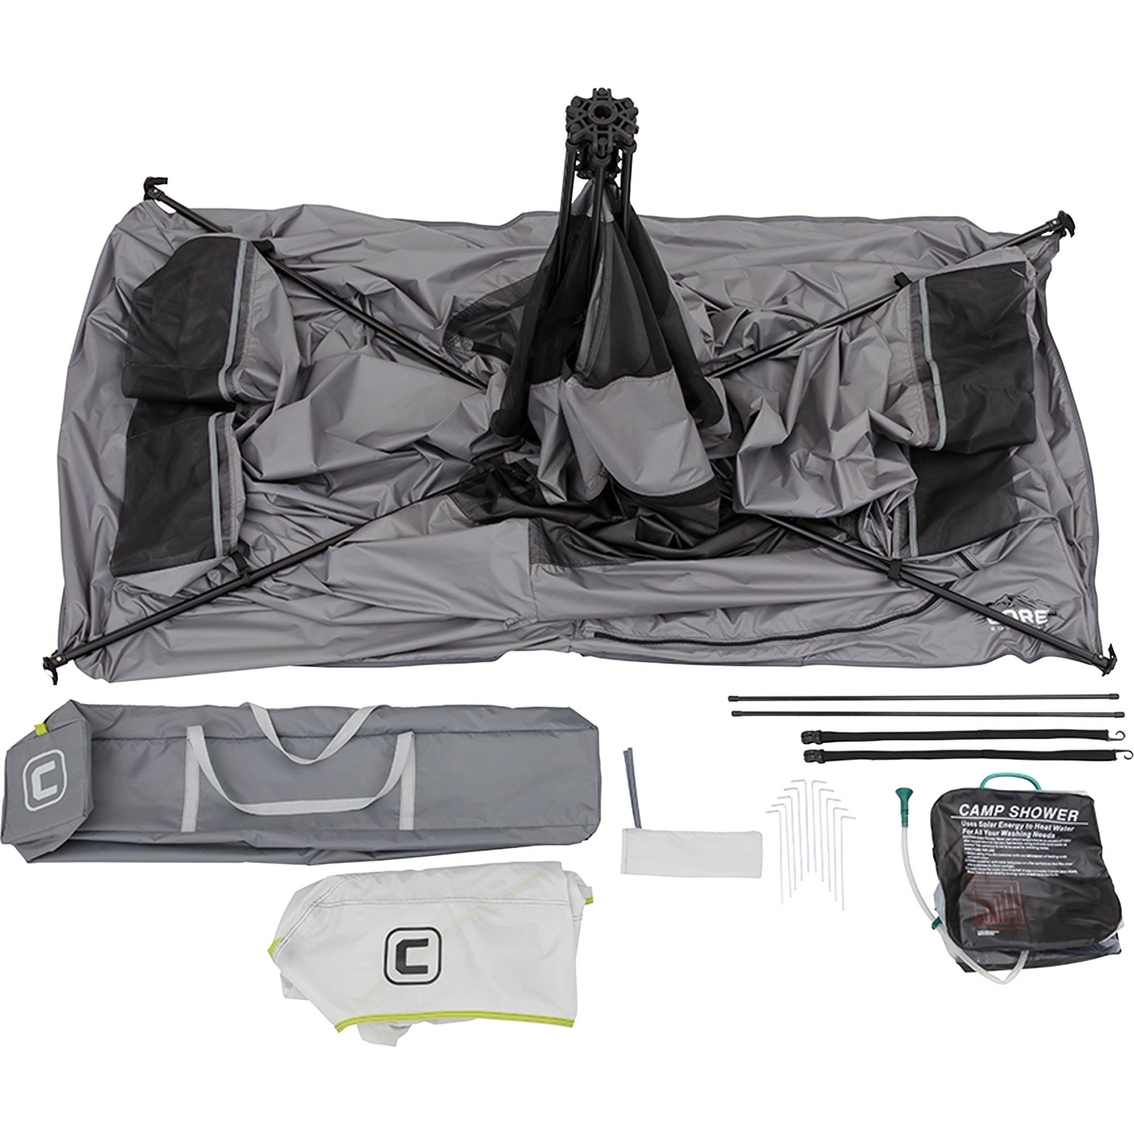 Core Equipment Instant Shower Tent - Image 5 of 10